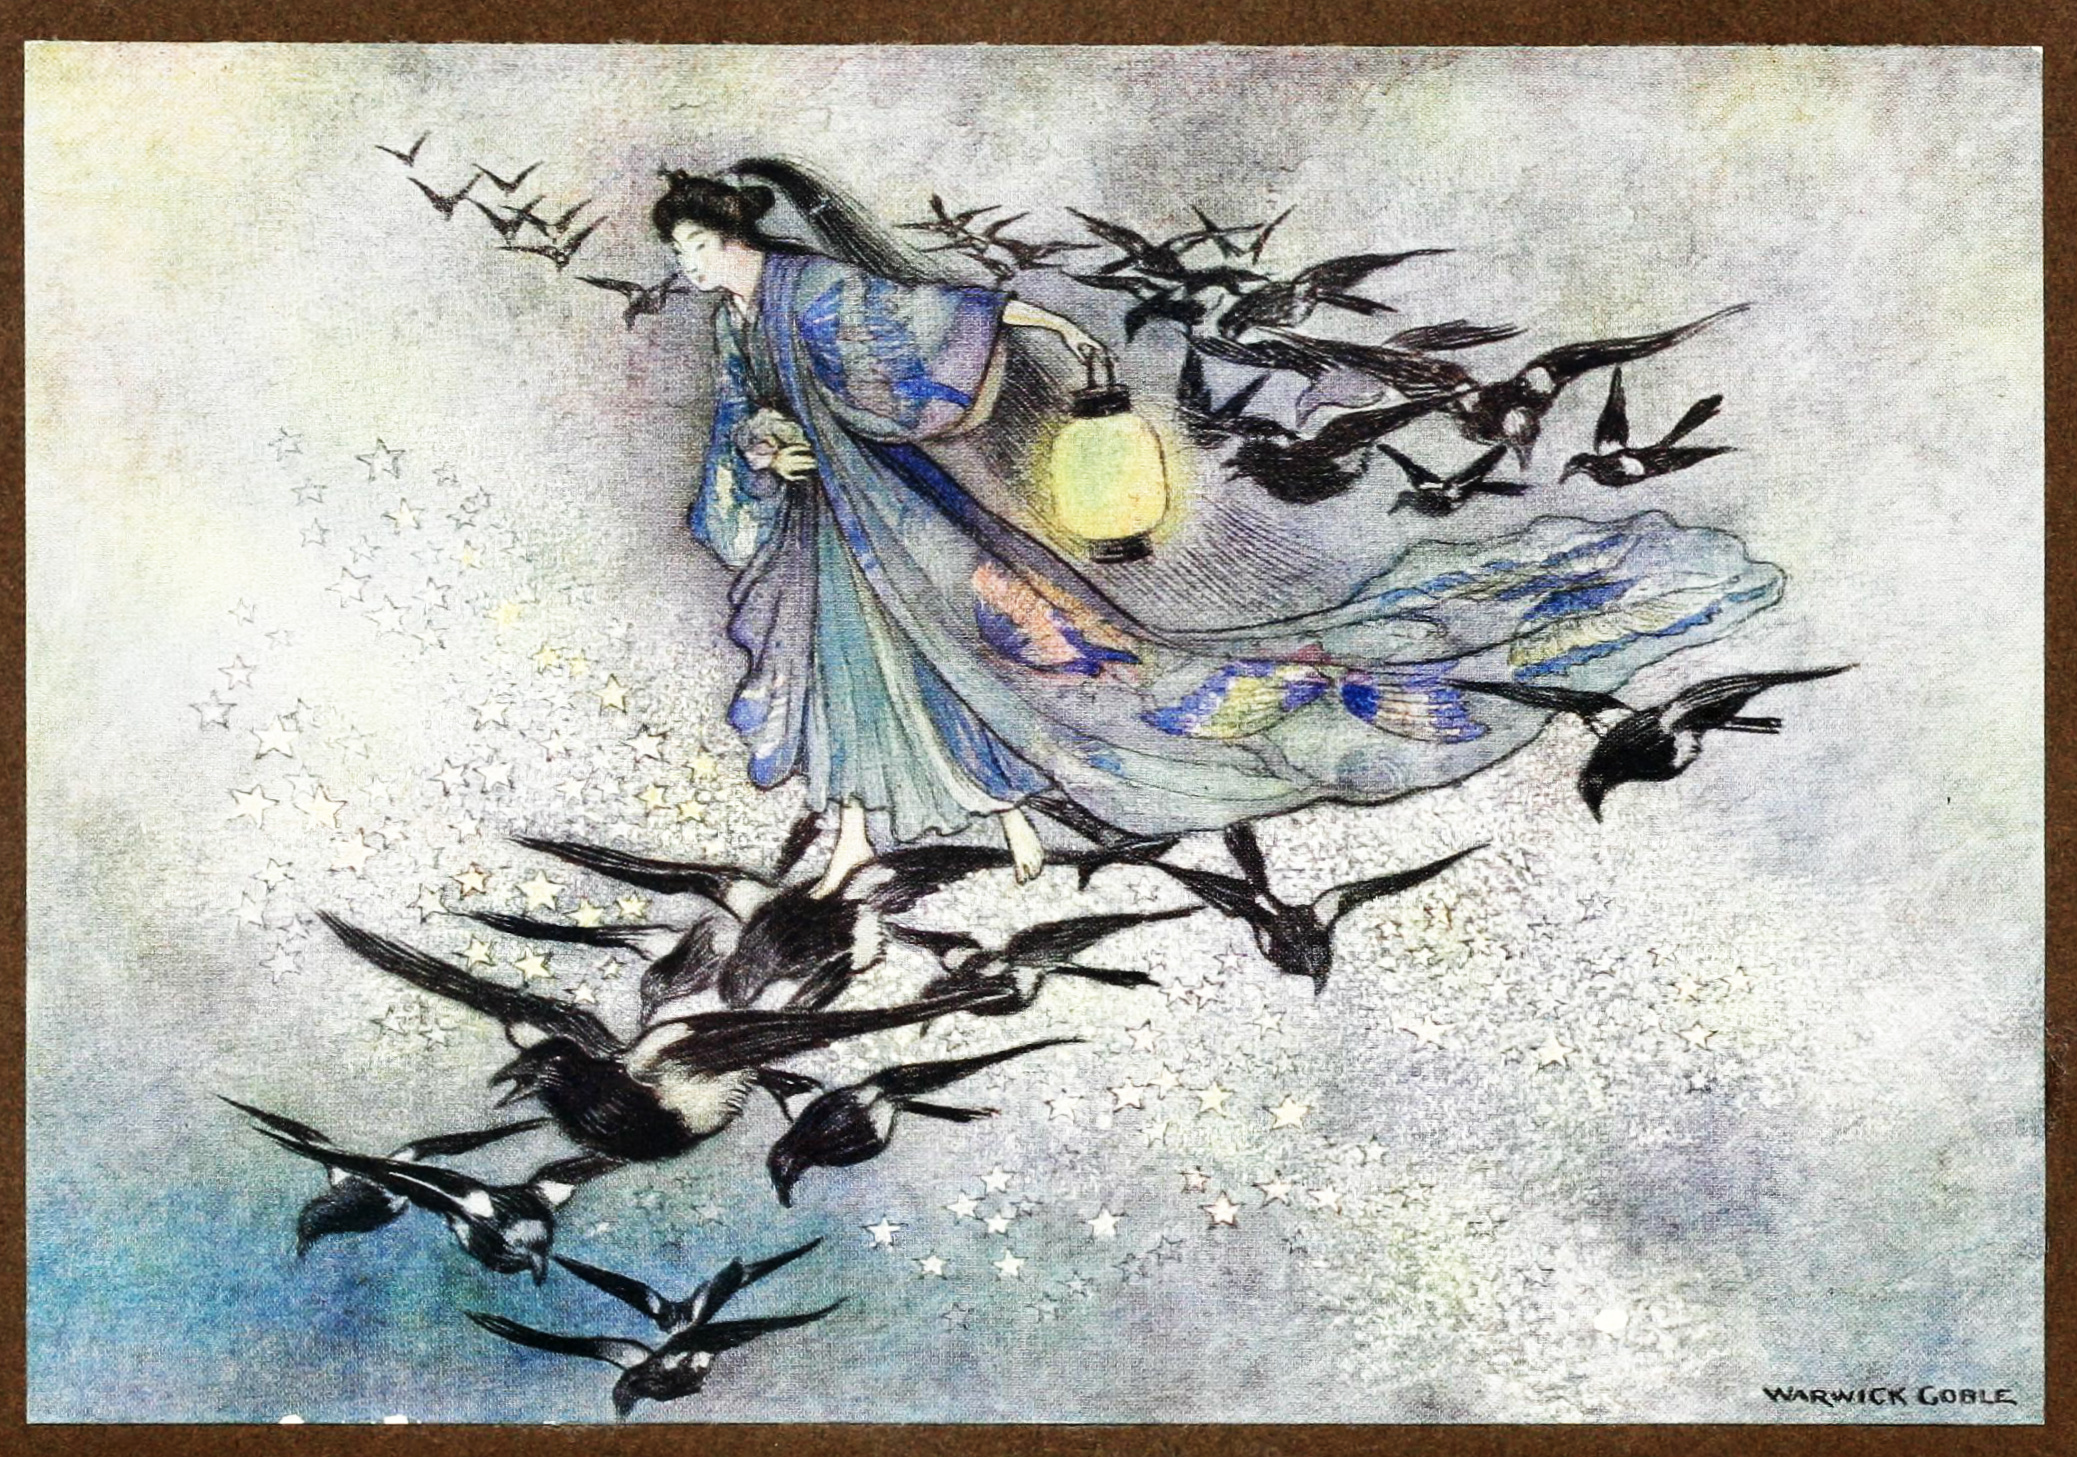 A woman carries a lantern while standing on a flock of birds who fly in a starry sky.